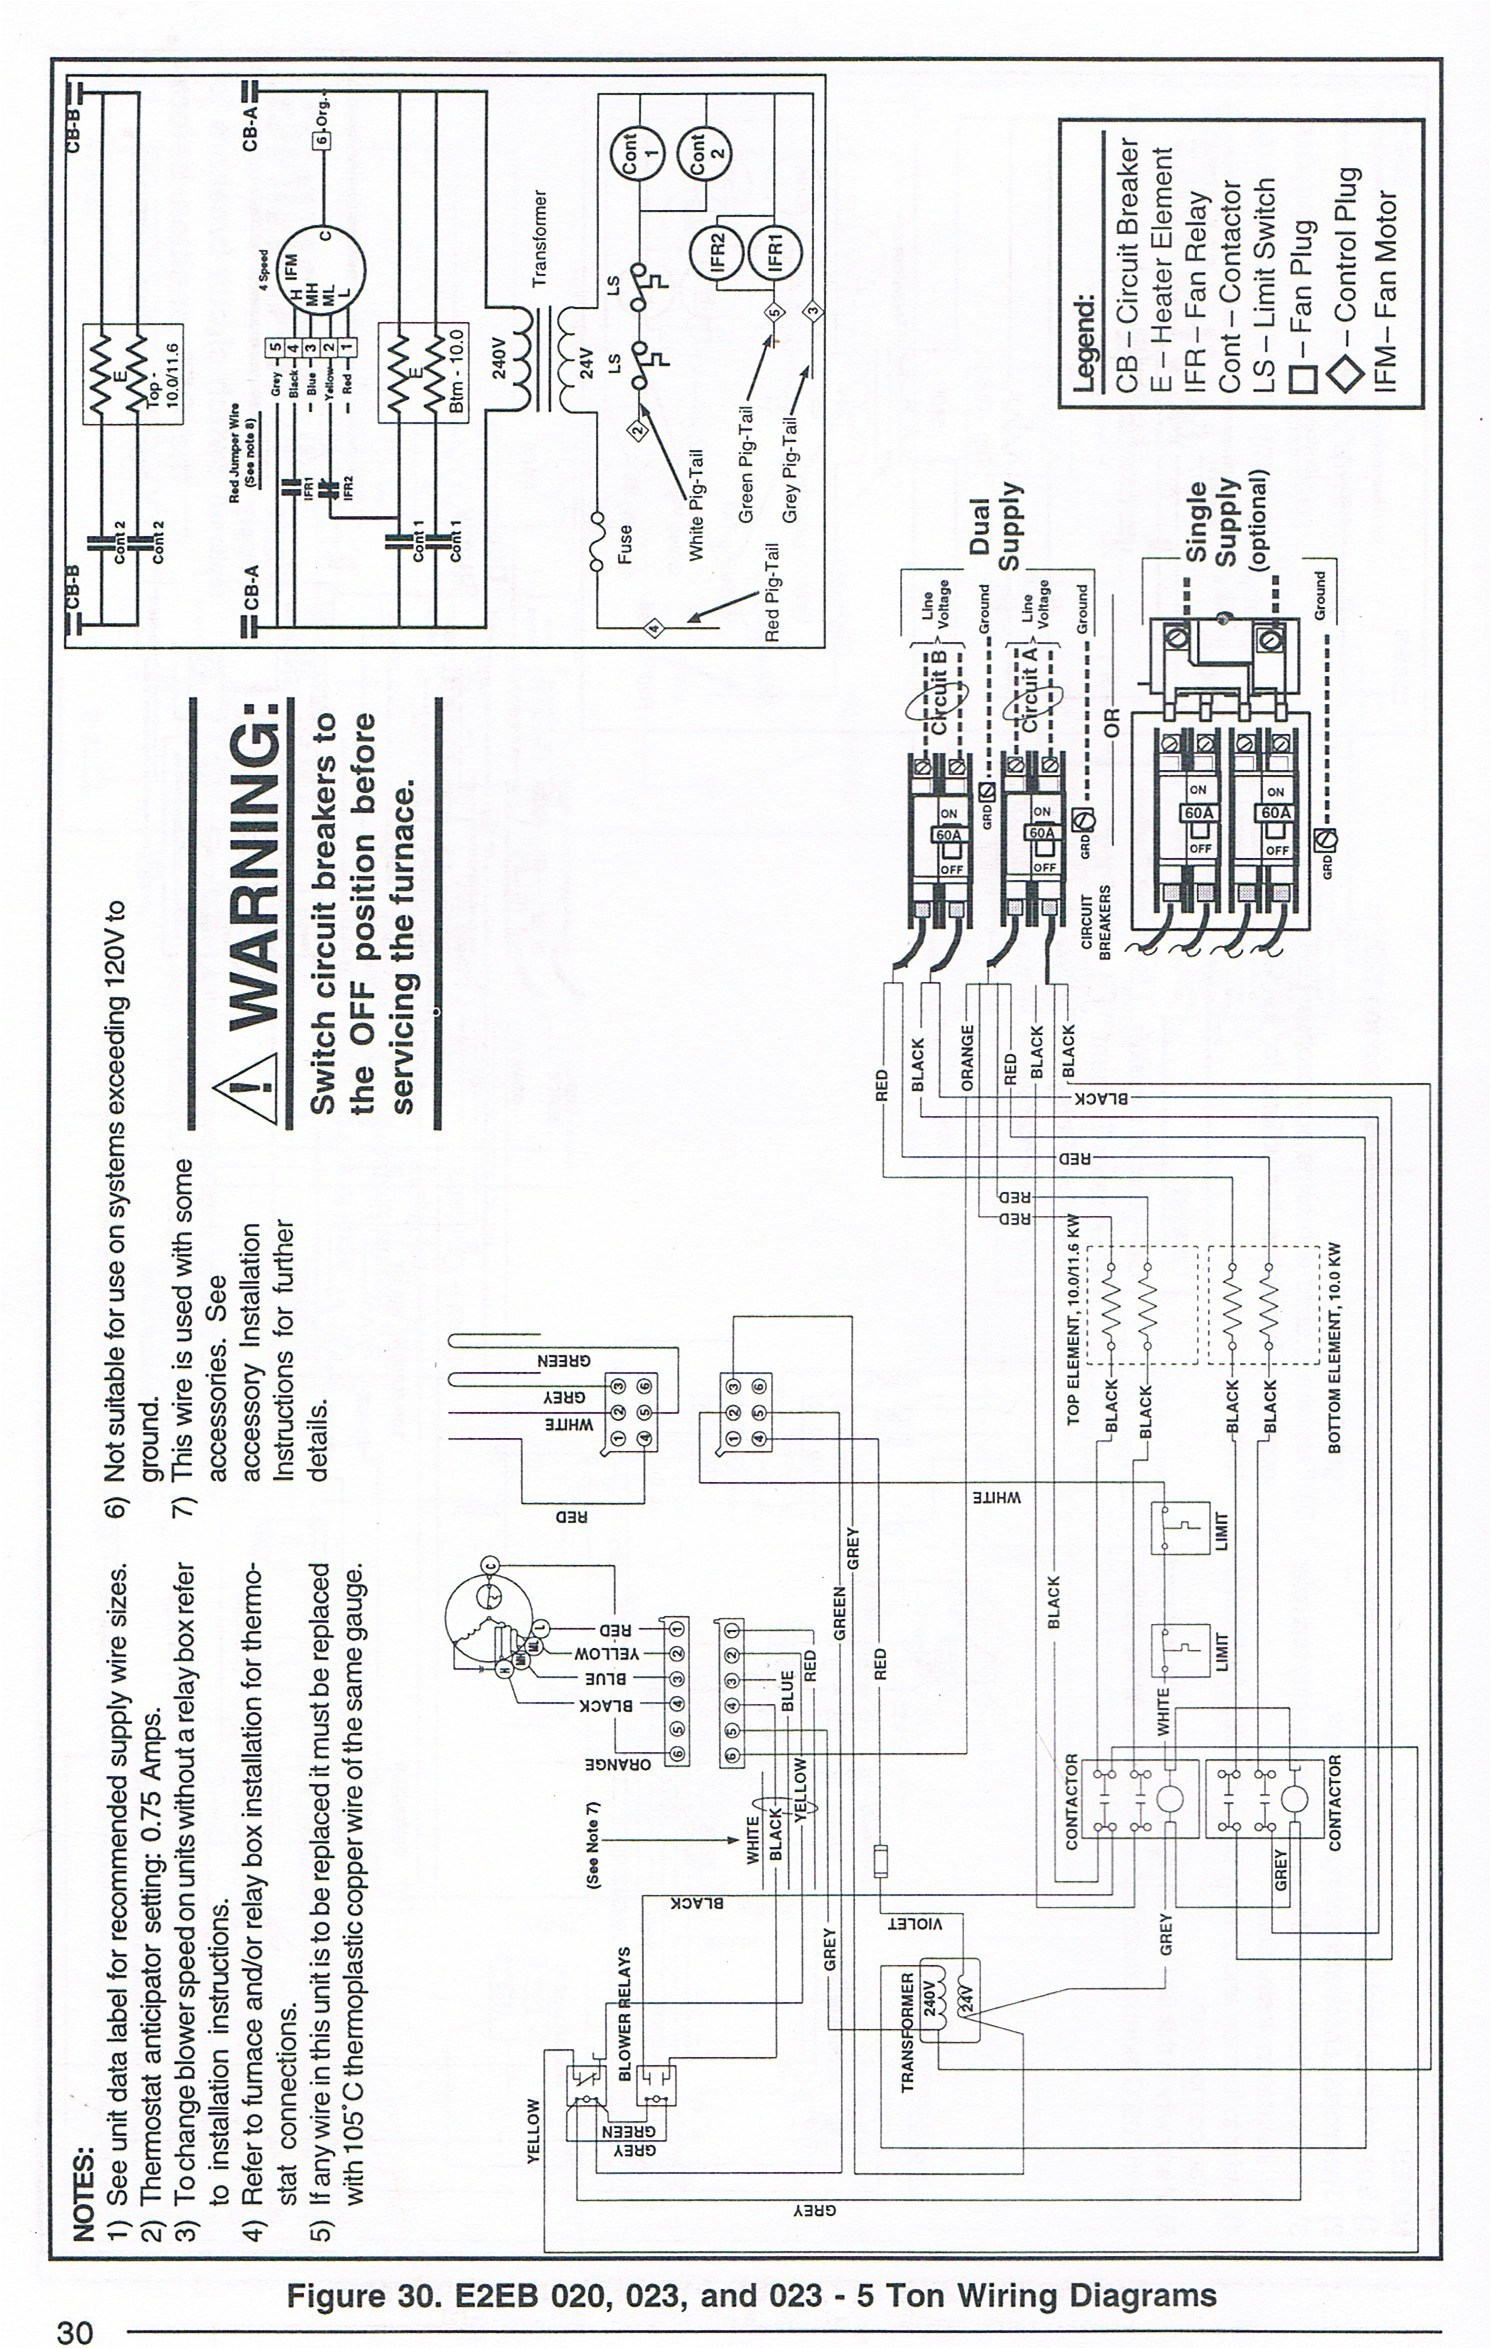 westinghouse electric furnace wiring diagram wire management wesco furnace blower wiring diagram wiring diagram center coleman